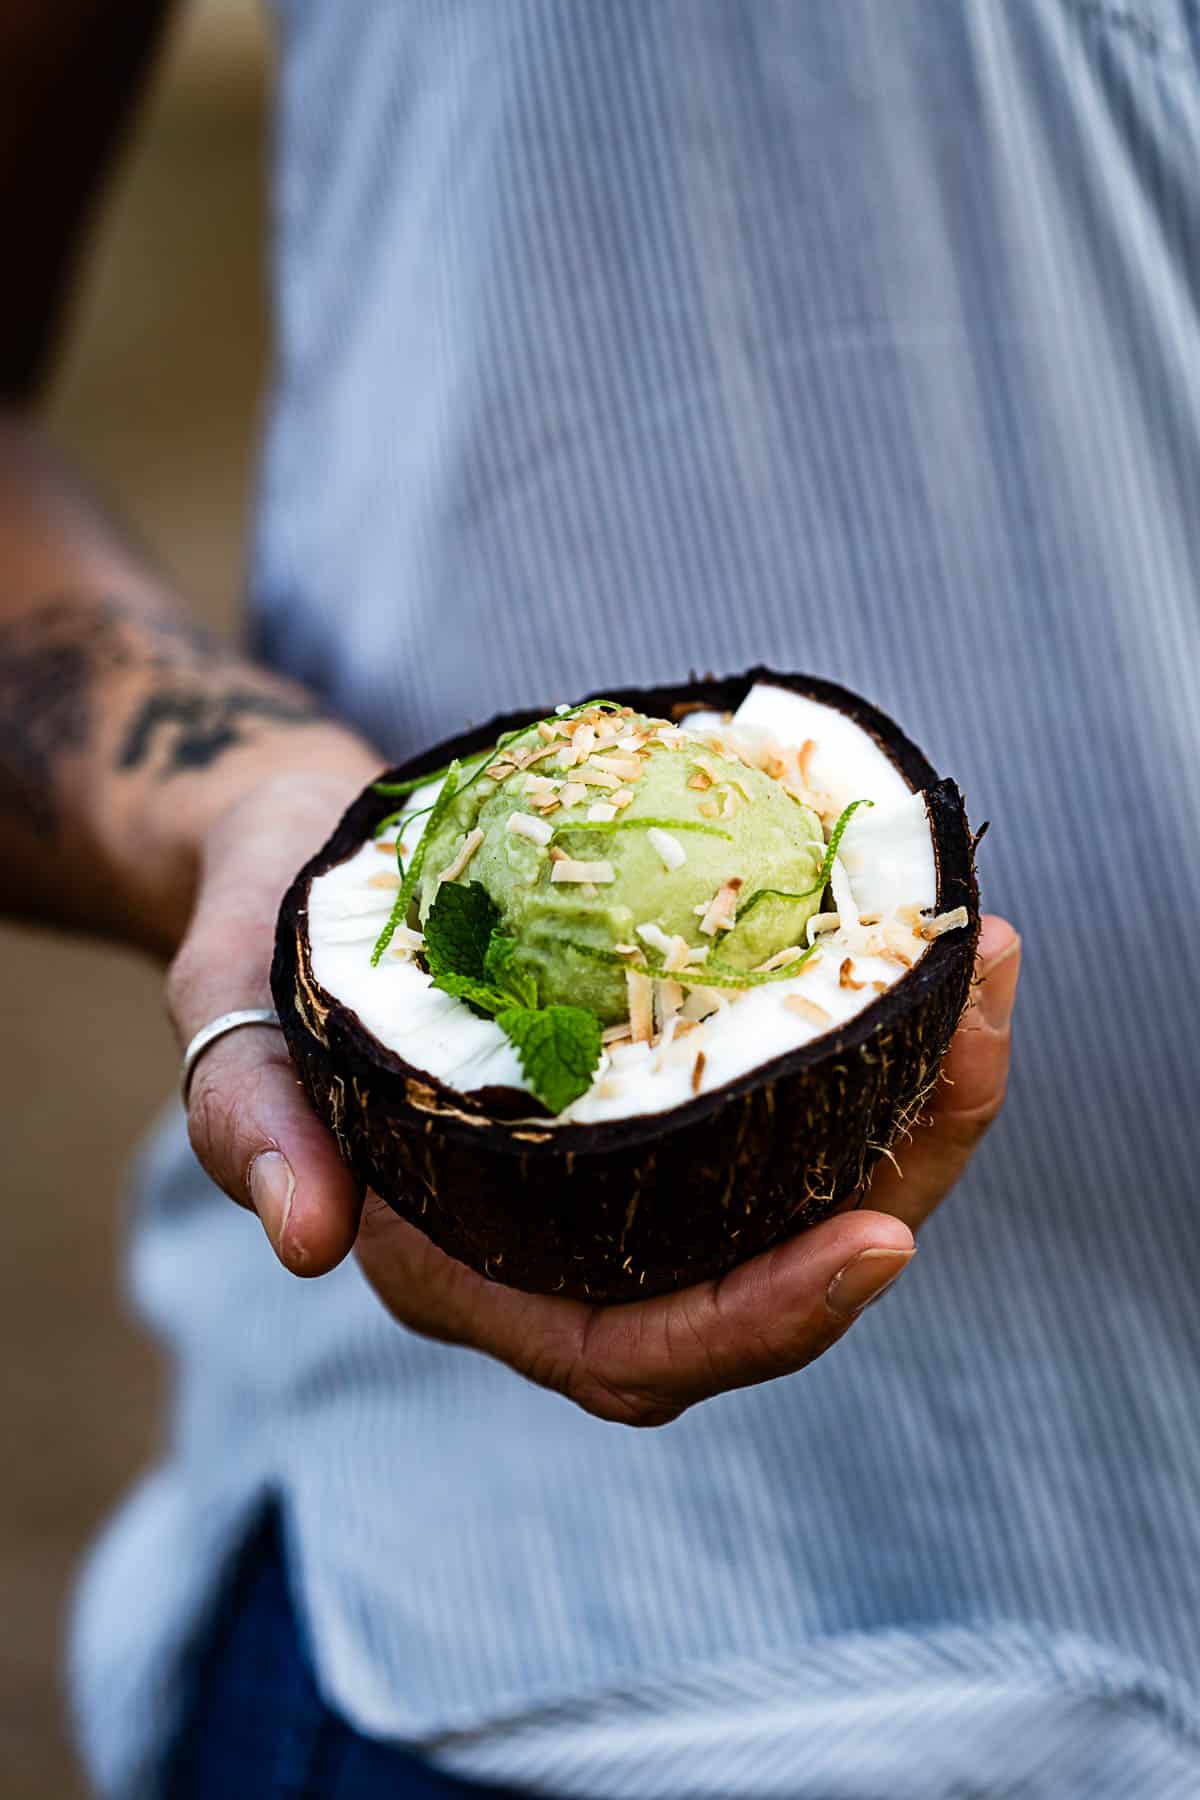 Person holding guacamole ice cream in a coconut bowl from the front view.